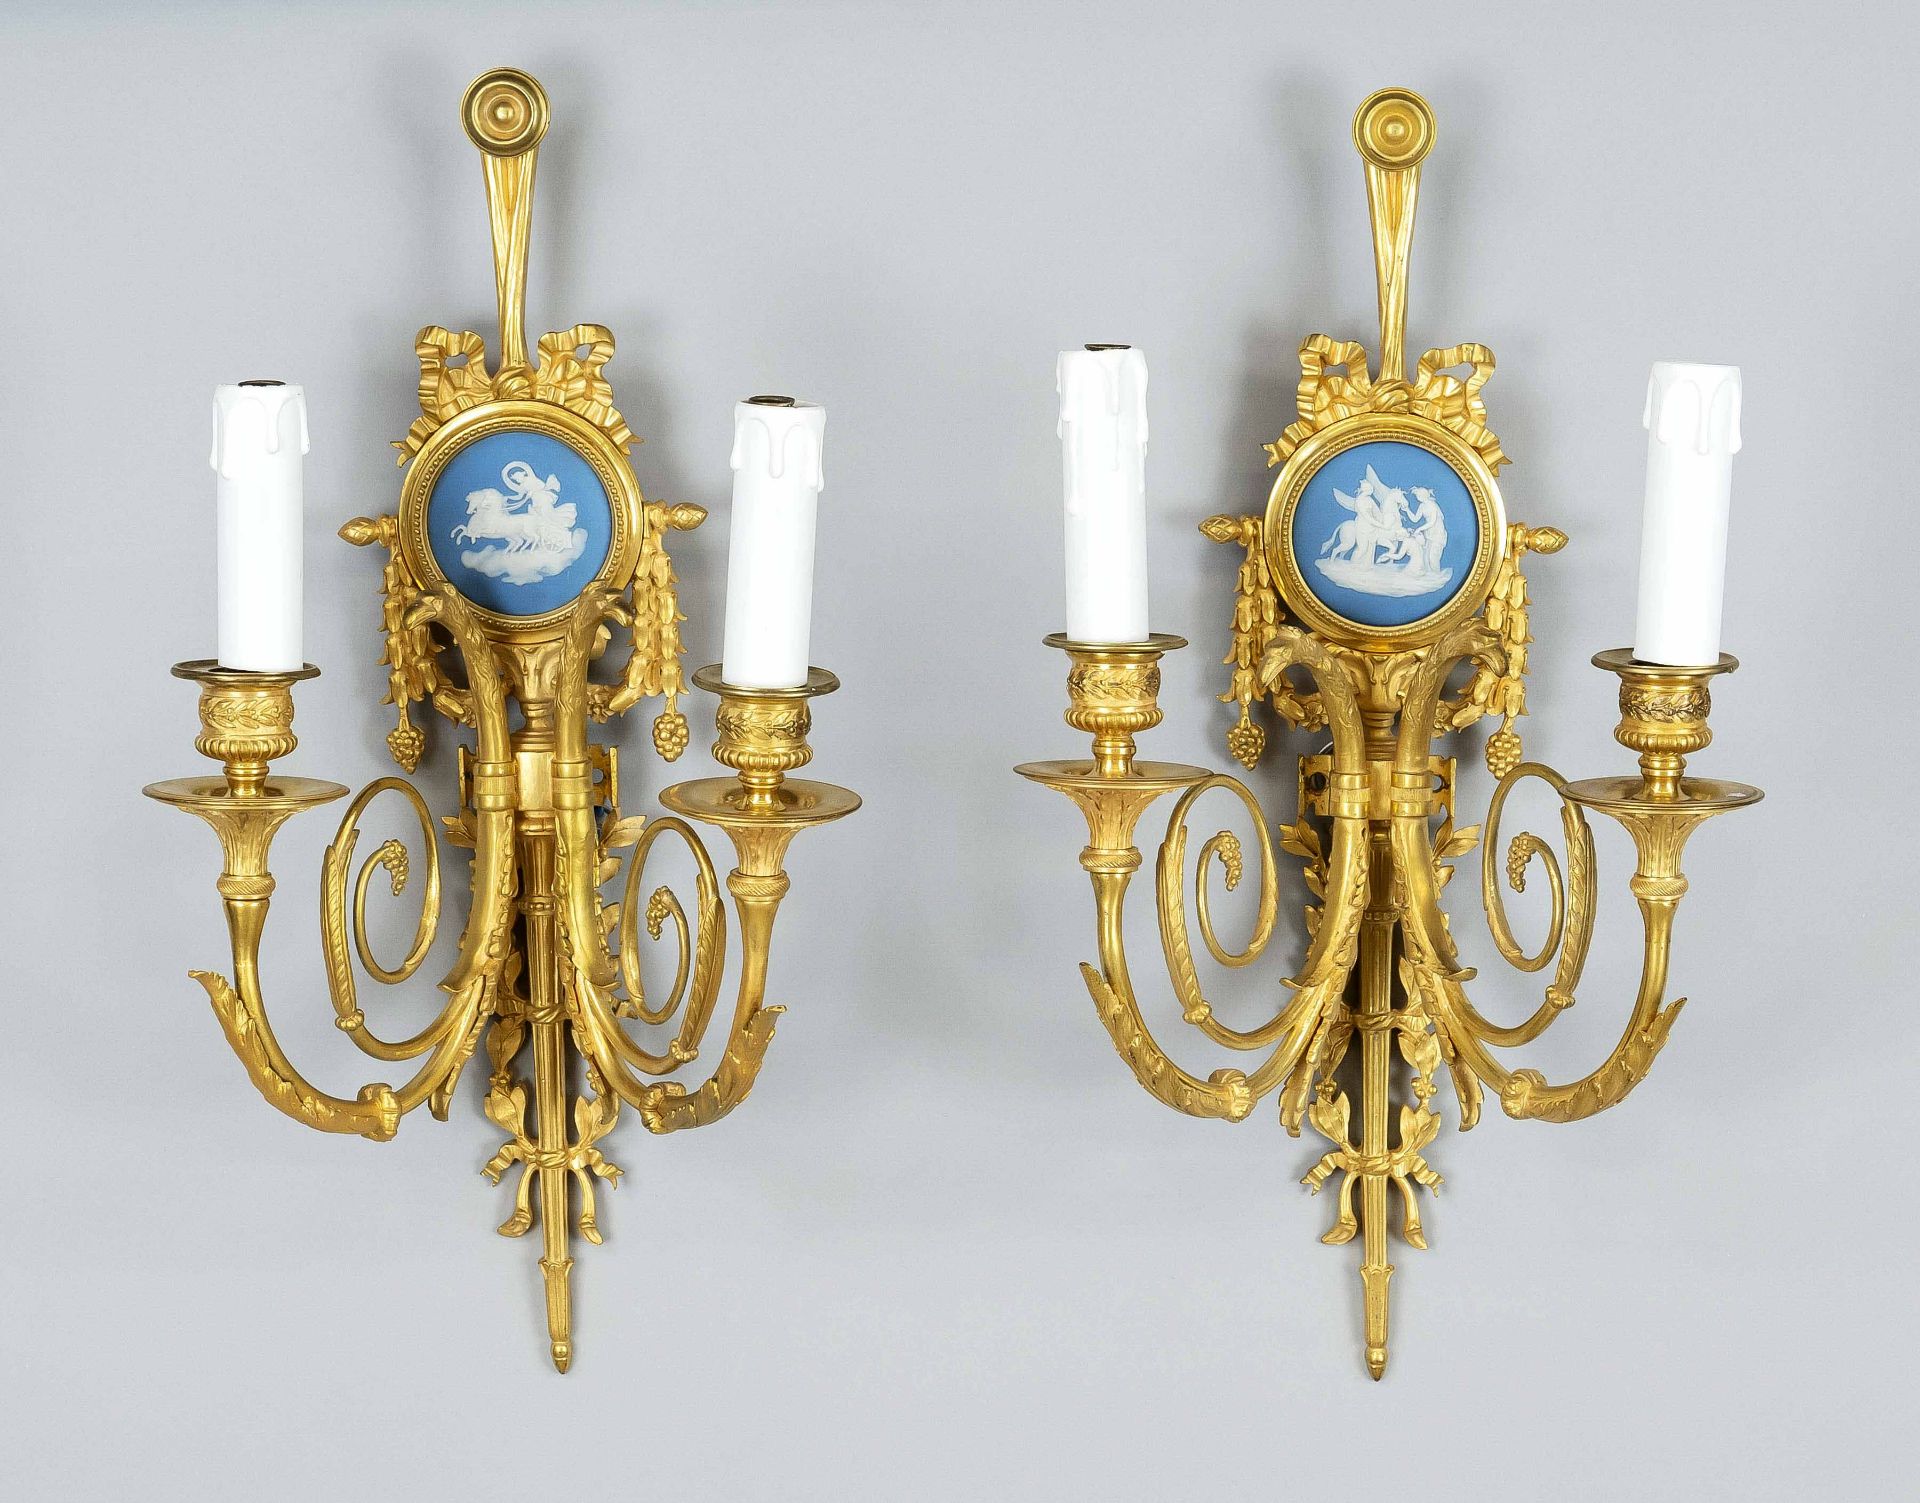 Pair of sconces Second Empire, probably France, 19th c., bronze gilded with set porcelain plaque